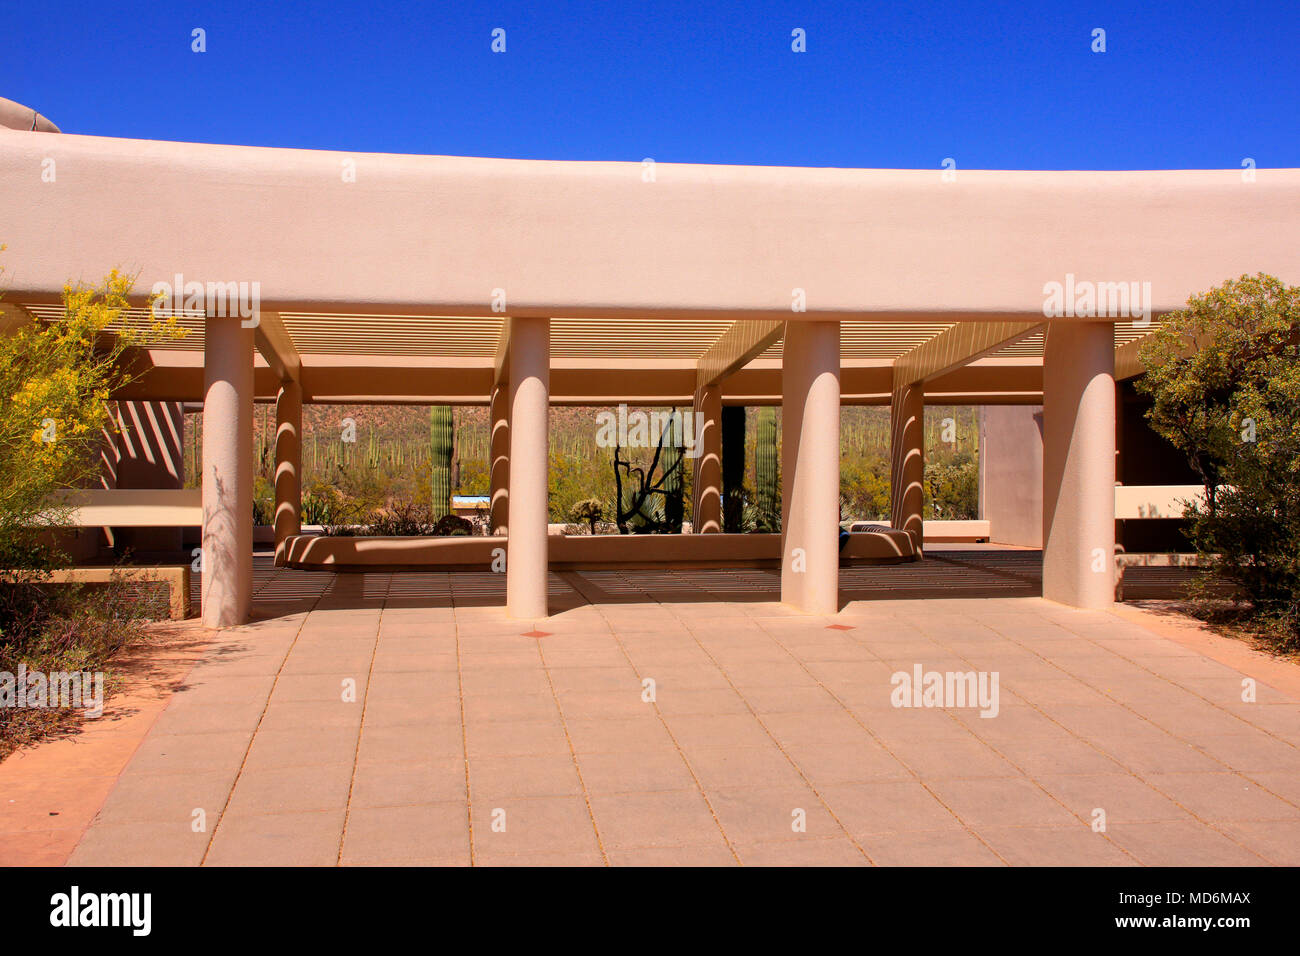 The National Park visitor center in the West Tucson Mountain district of Arizona Stock Photo